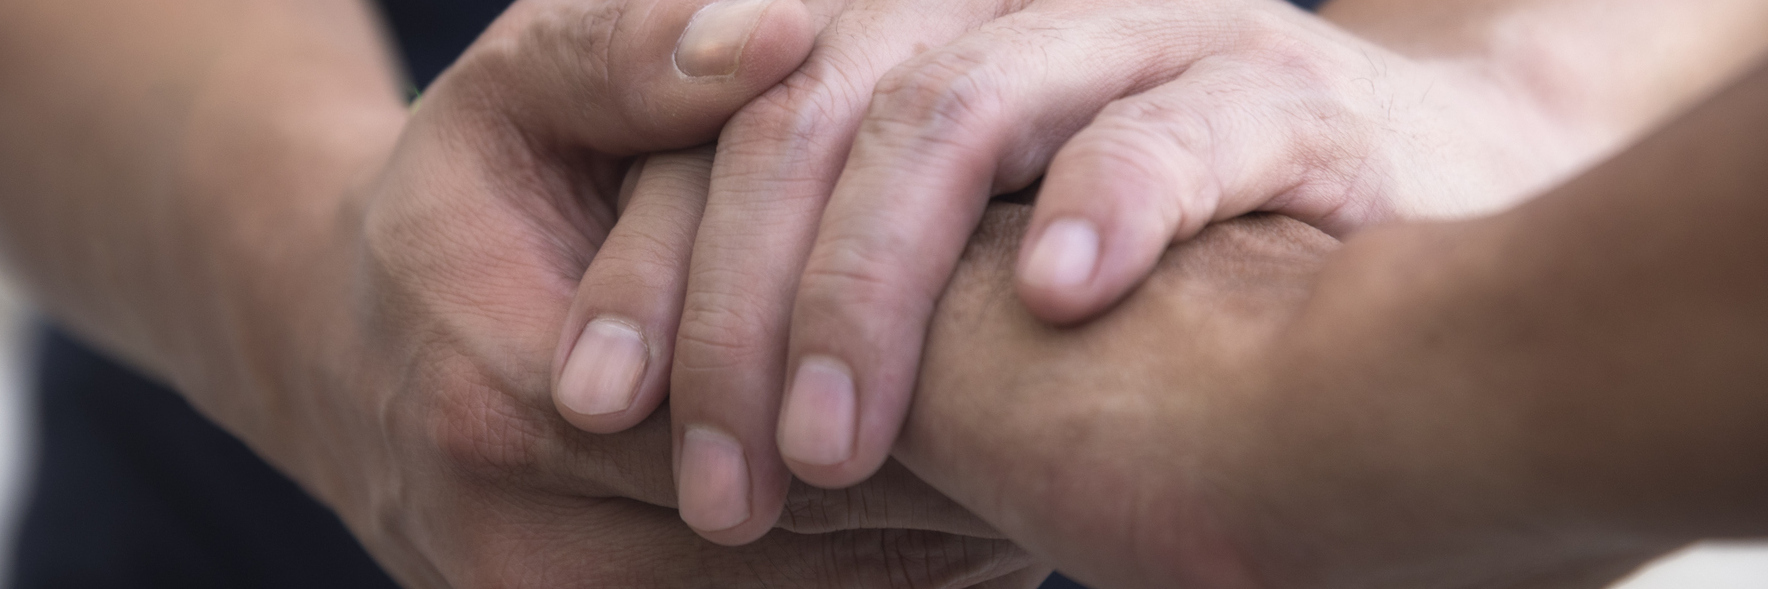 Man holding another man's hand in sympathetic, consoling gesture